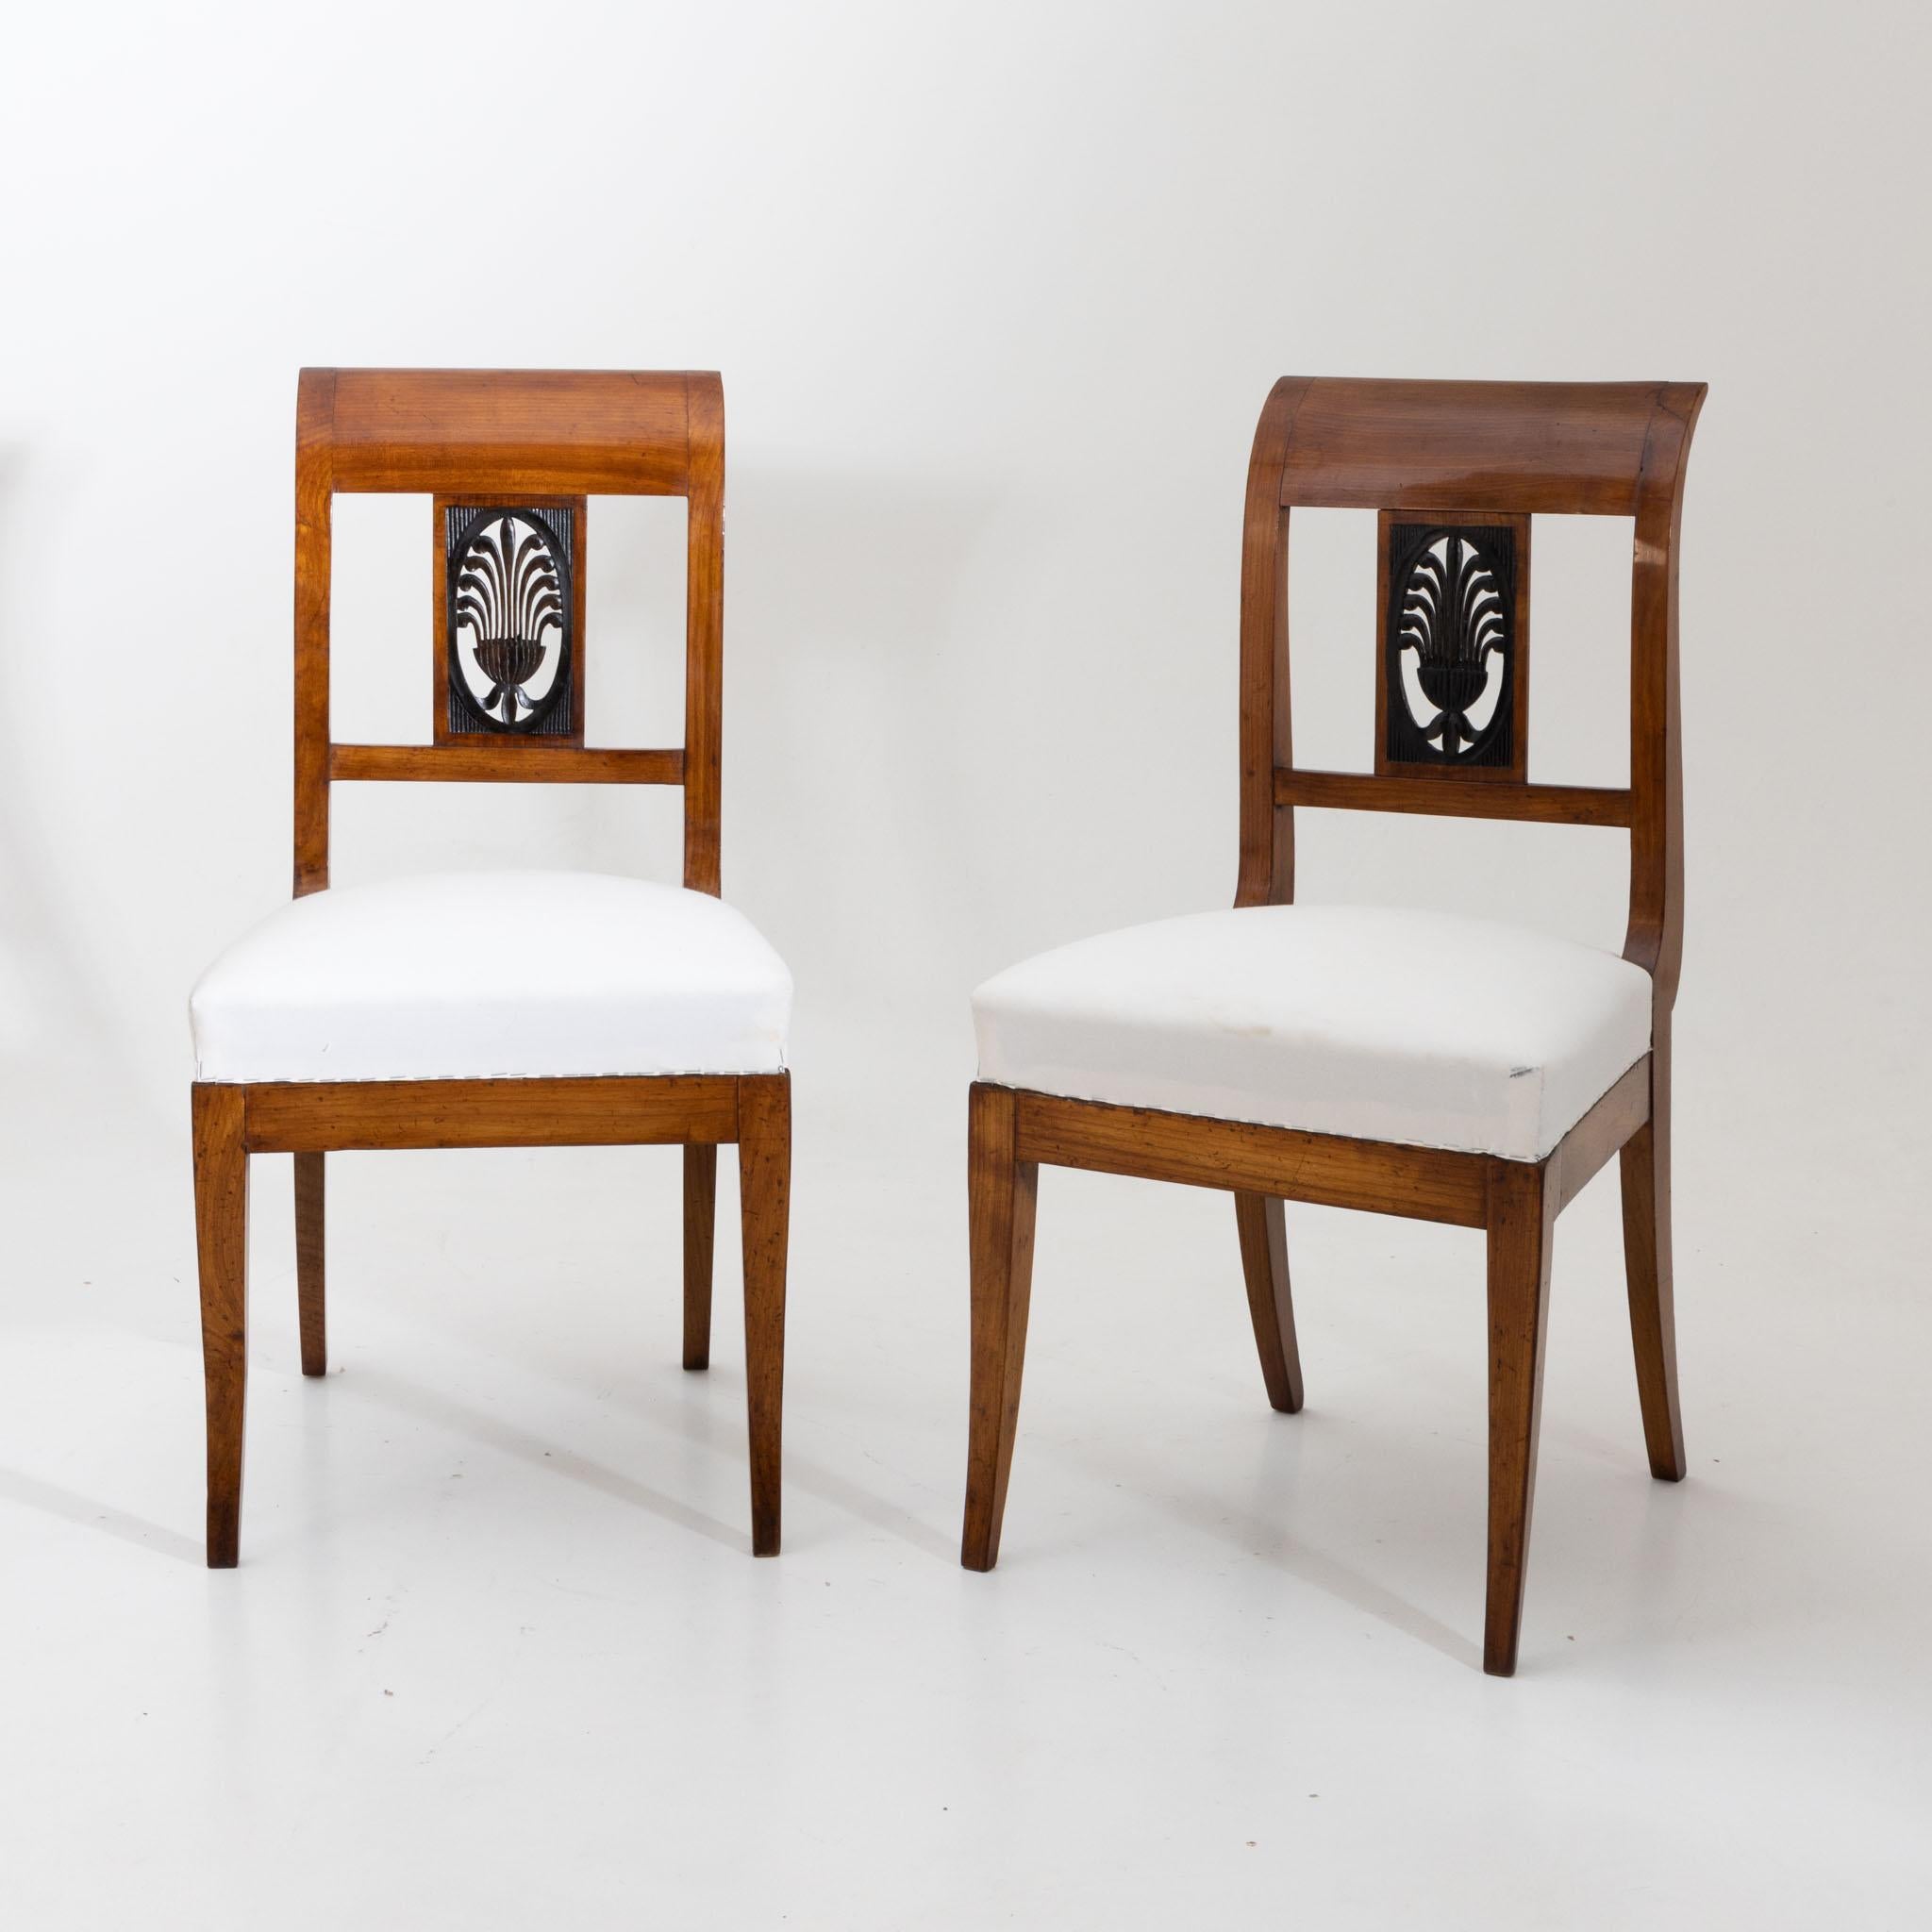 Pair of Biedermeier chairs of solid cherry with white seat and openwork backrest with dark stained reed leaf decoration. The chairs have been newly upholstered and hand polished.